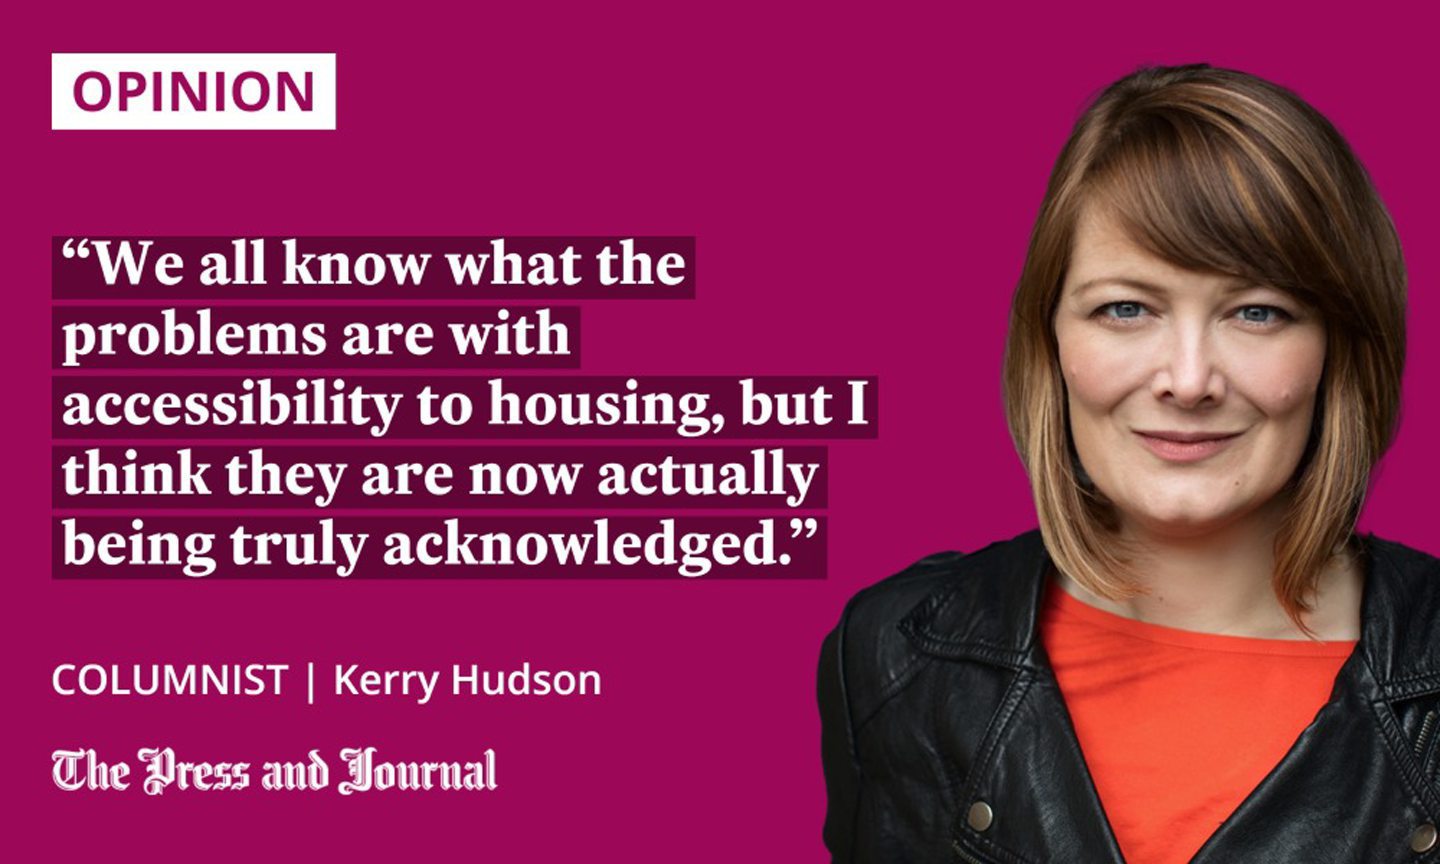 Columnist, Kerry Hudson speaks about the UK housing market: "We all know what the problems are with accessibility to housing, but I think they are now actually being truly acknowledged."